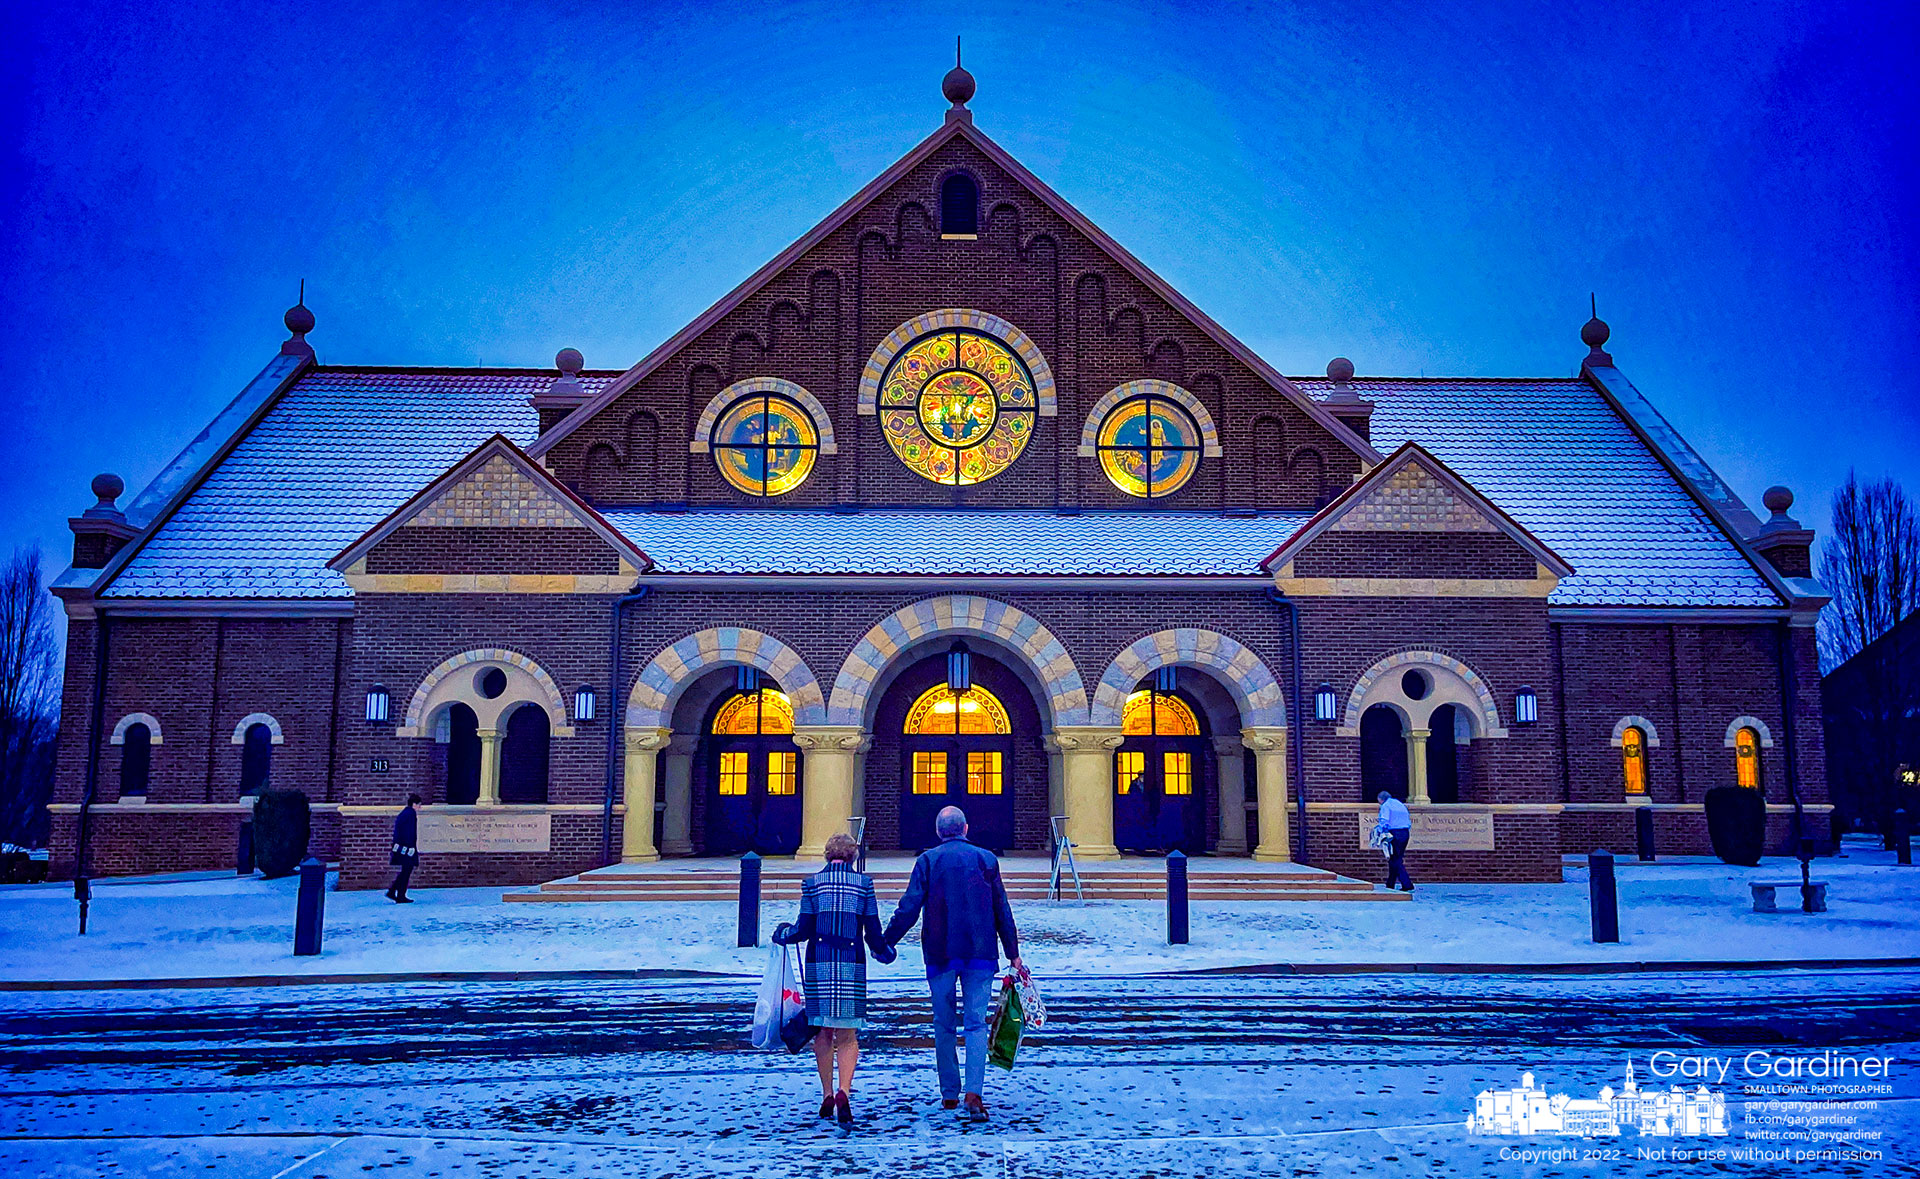 A couple carries donations into St. Paul the Apostle Catholic Church before sunrise on a below-freezing morning with an overnight dusting of snow. My Final Photo for December 18, 2022.